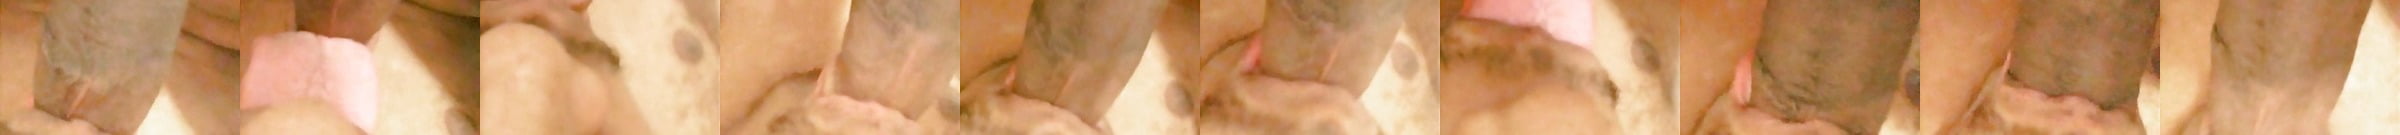 Featured Self Sucking Gay Porn Videos 3 Xhamster